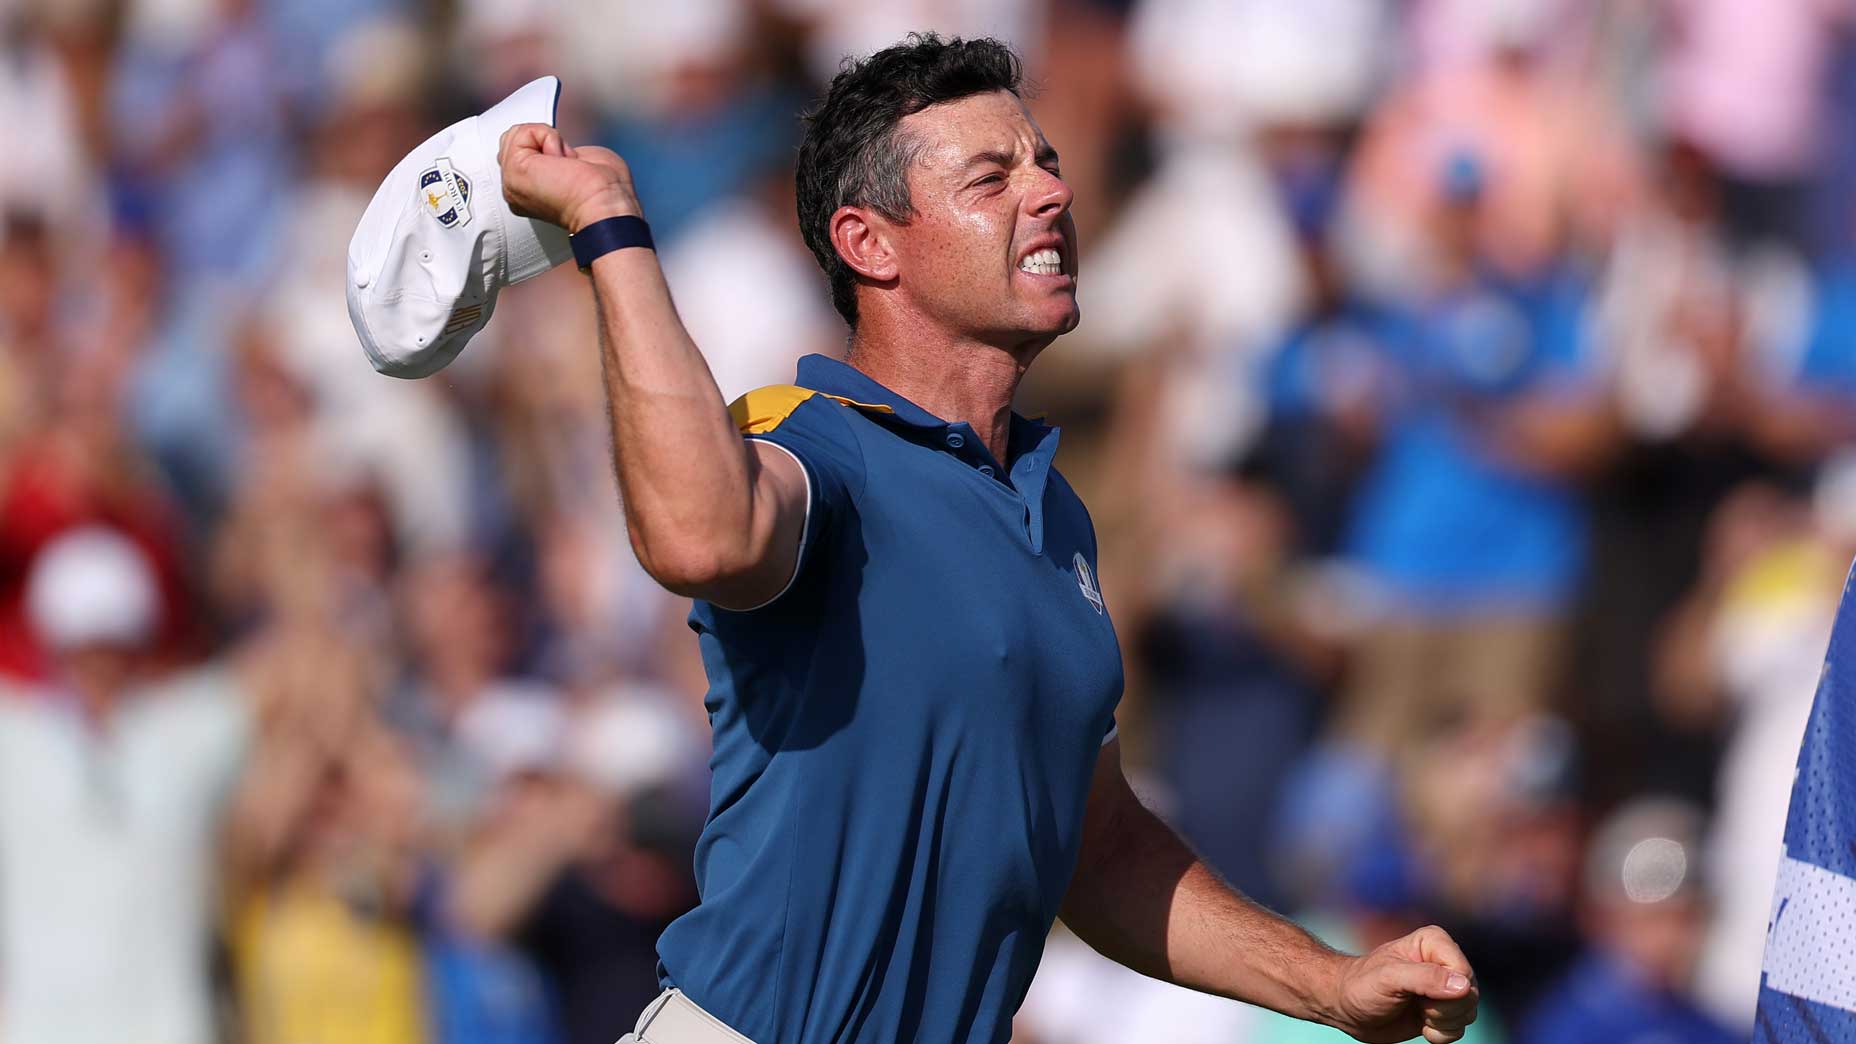 Rory McIlroy ryder cup